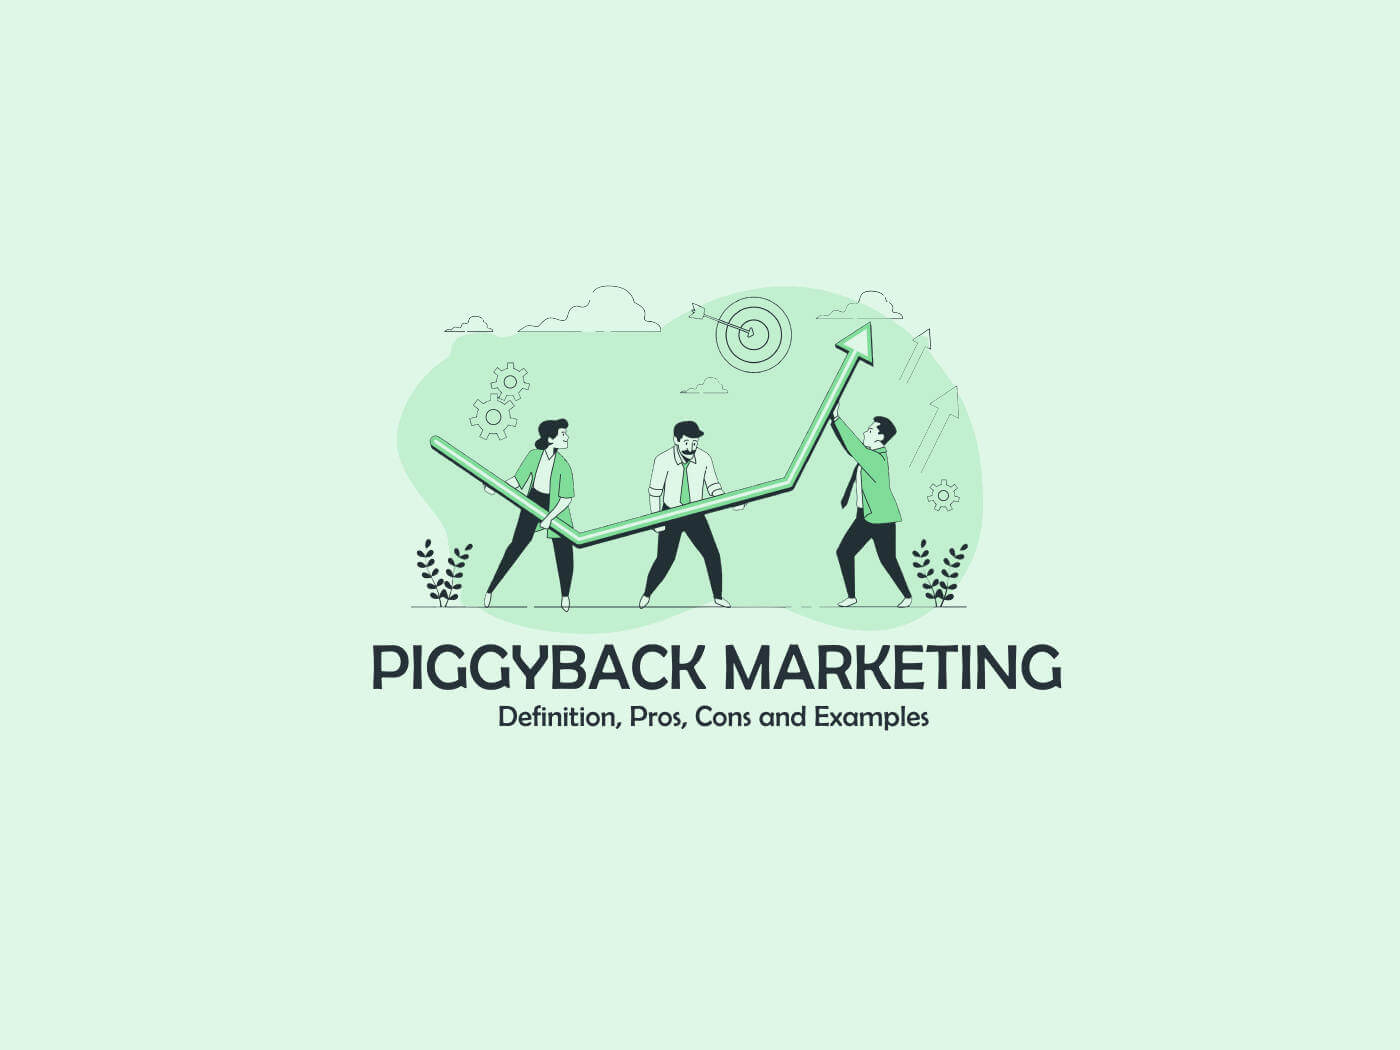 Piggyback Marketing - Definition, Pros, Cons, Examples & More